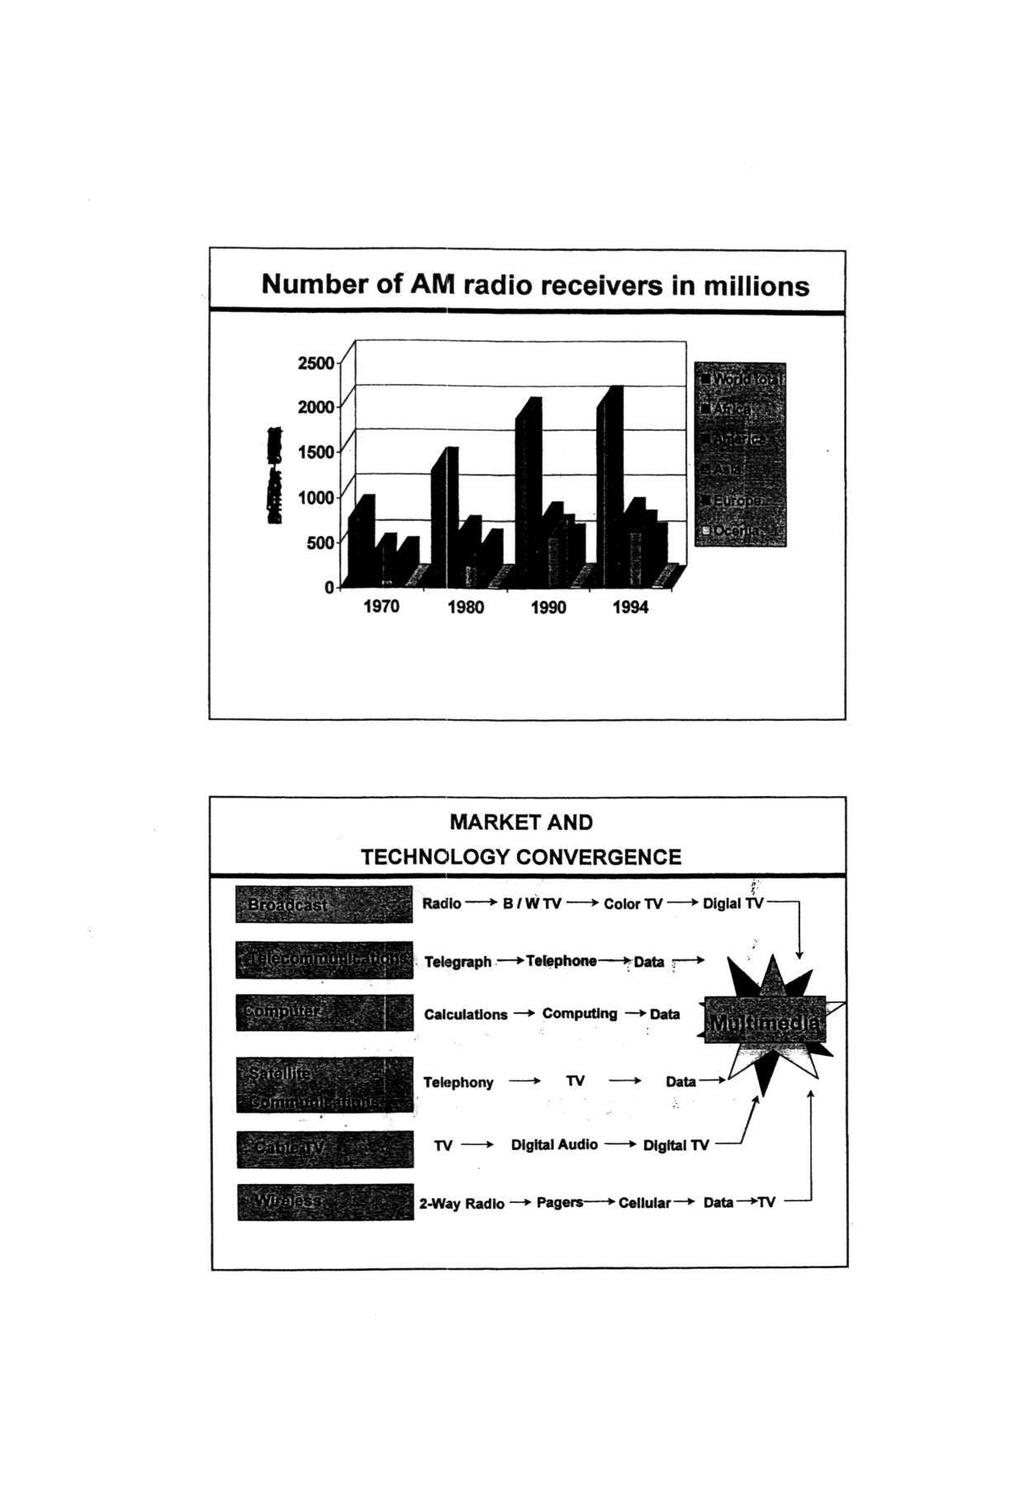 Number of AM radio receivers in millions MARKET AND TECHNOLOGY CONVERGENCE Radio B / WW Color TV Diglal TV- Teiegraph